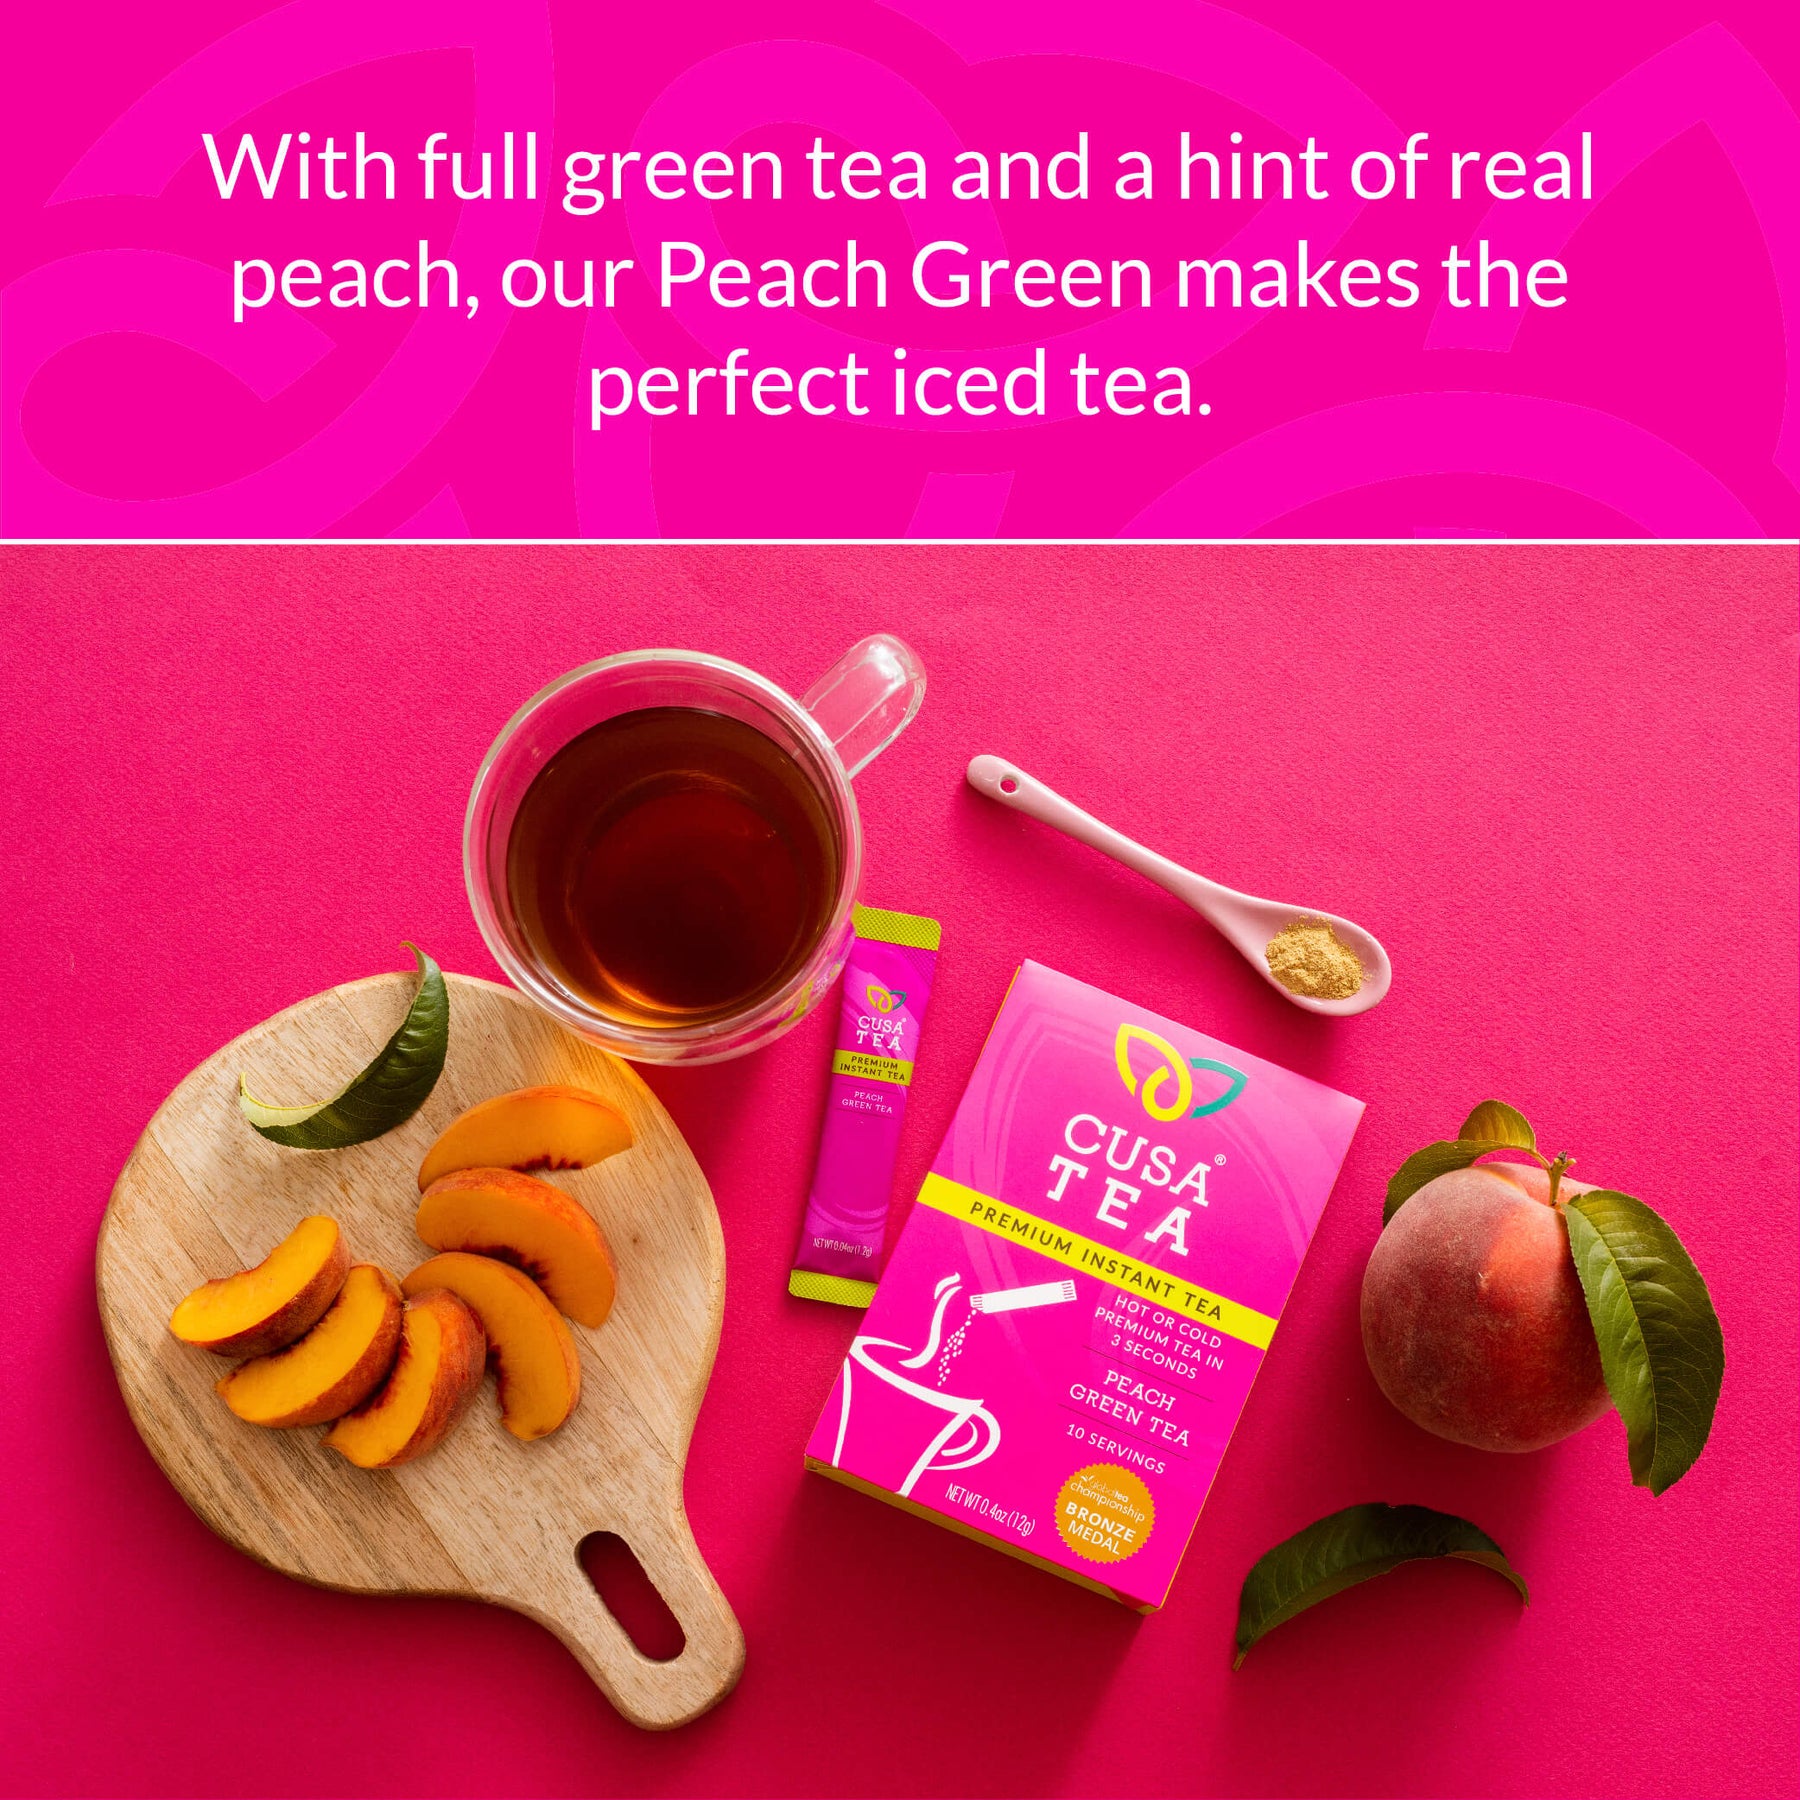 Cusa Tea & Coffee | Premium Instant Peach Black Tea with Real Fruit & Spices | Organic Leaves Drink Mix Packets | Hot or Iced Tea (30 Single Servings)